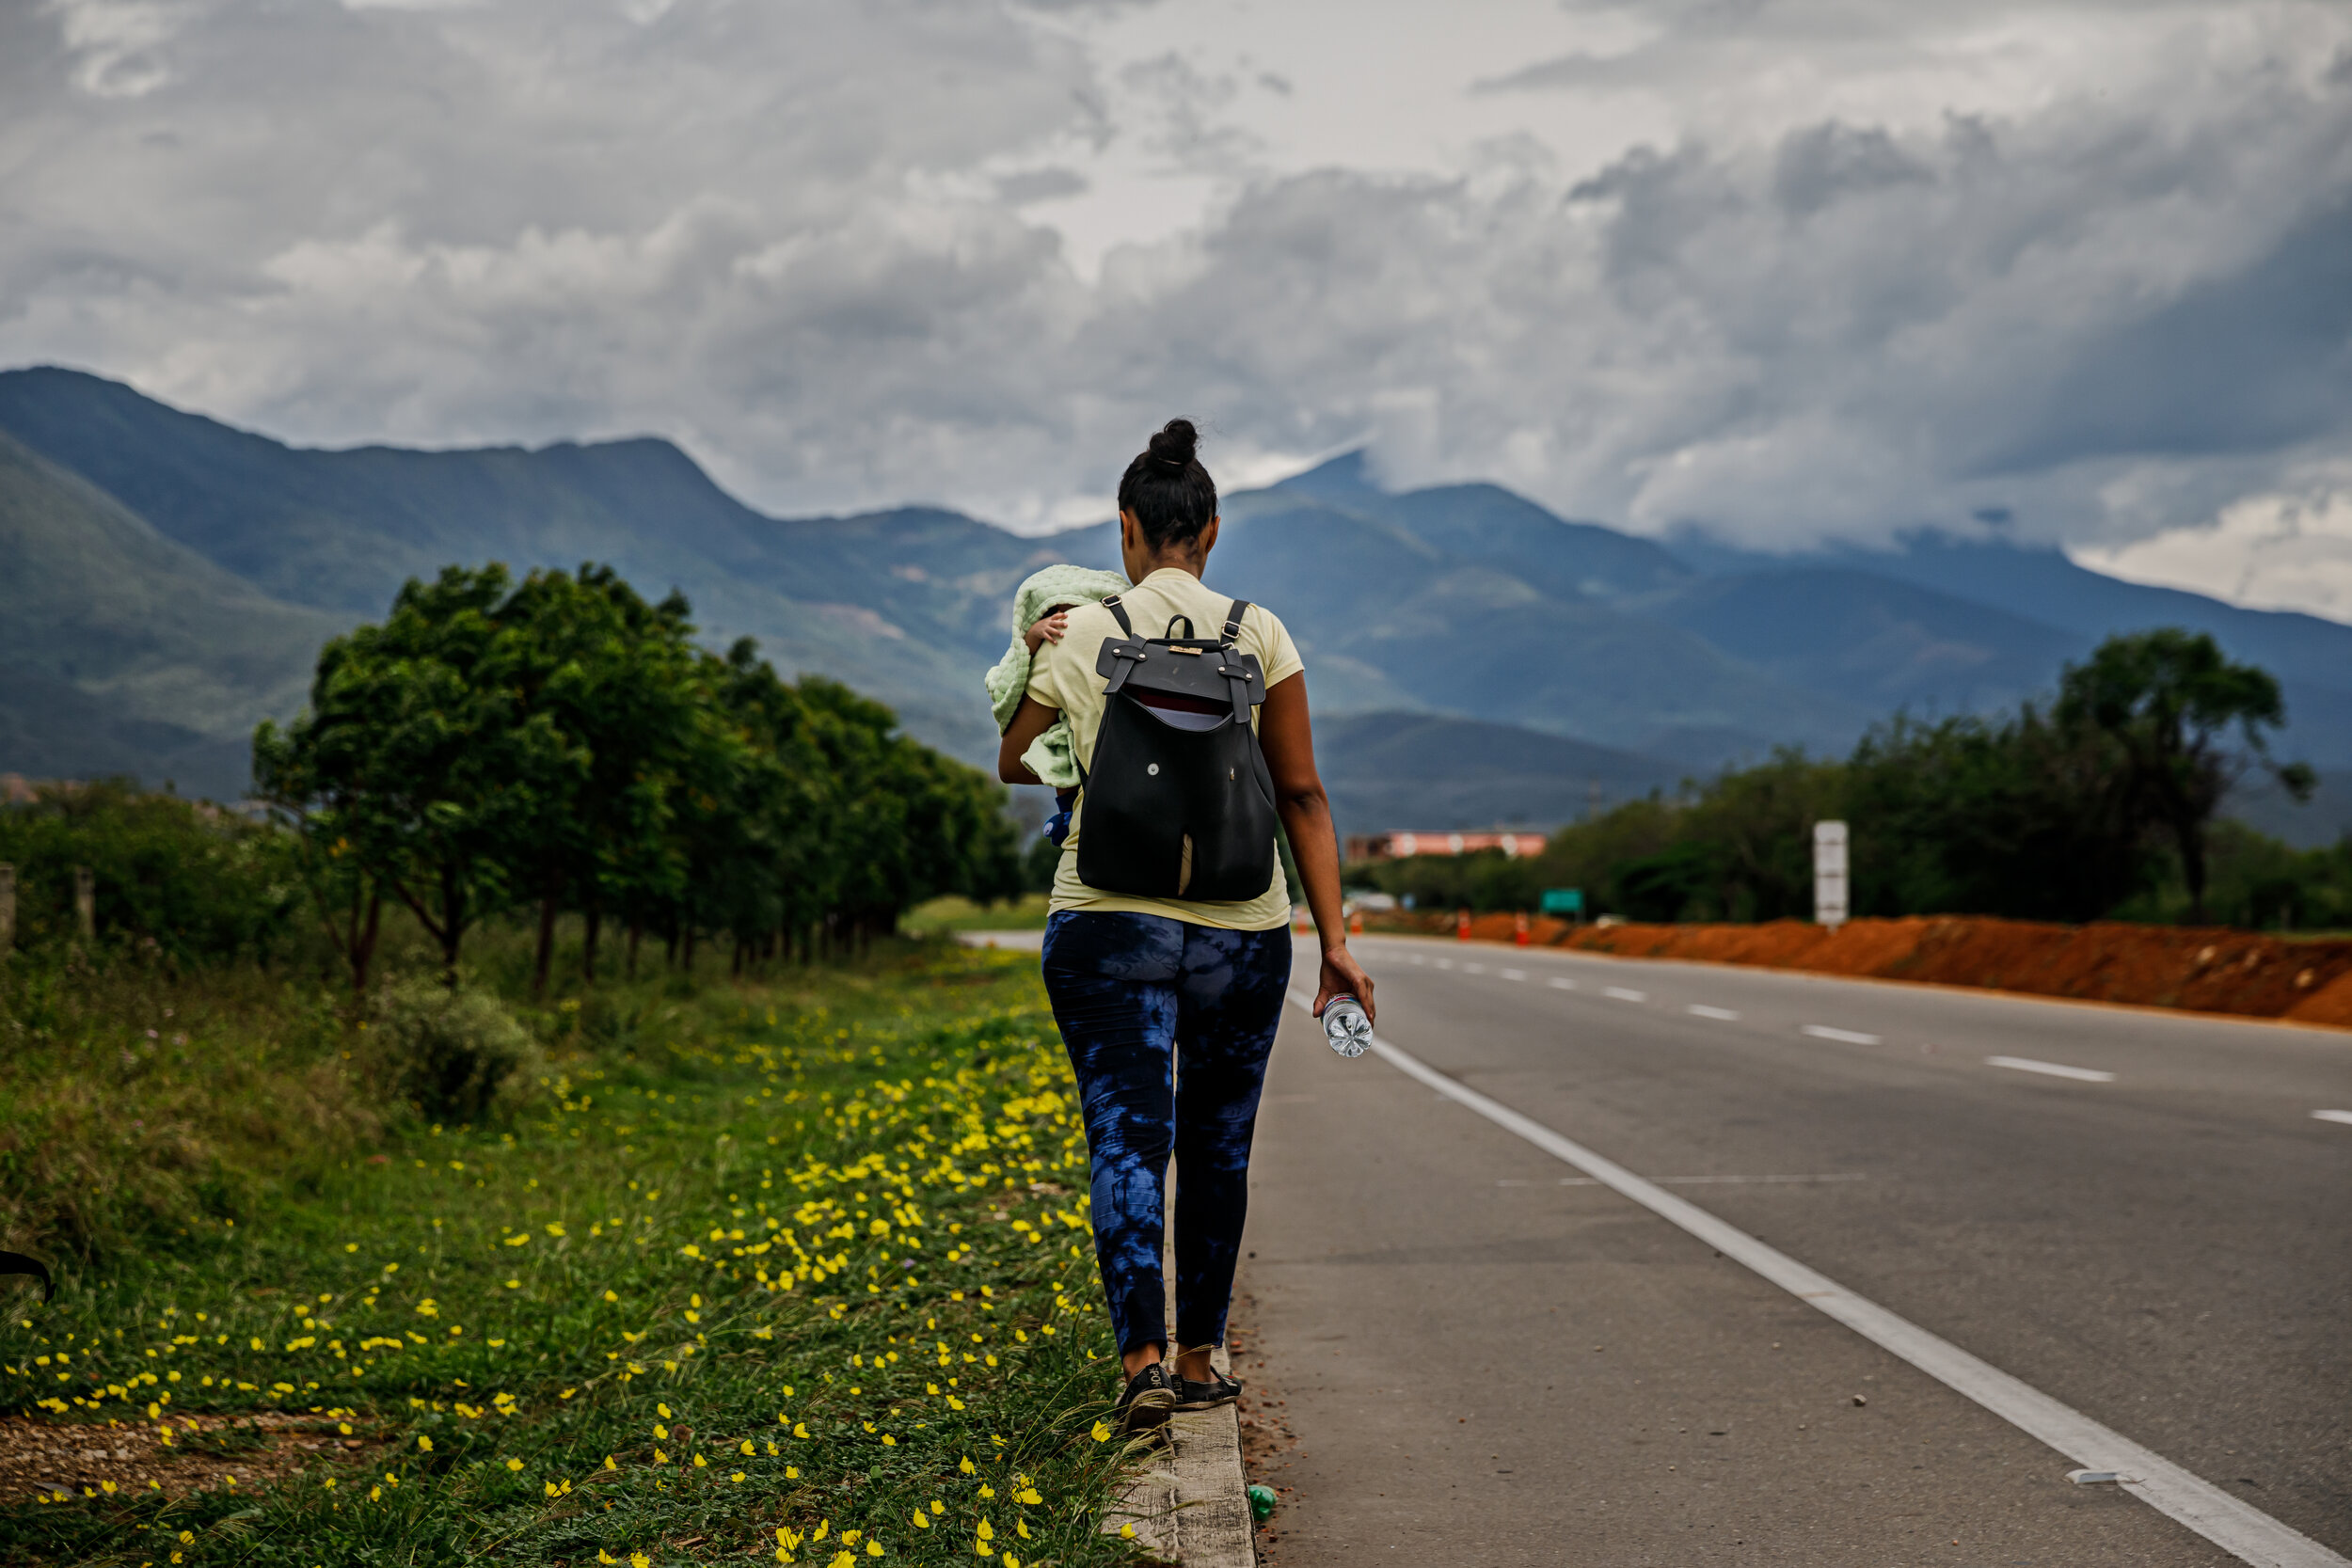  At the beginning of her journey, Valentina Durn carries her month-old son, Samuel and walks along Route 55 near Ccuta, Colombia. Nine miles from the border, Durn started feeling lightheaded. She had been diagnosed with low blood pressure and maln